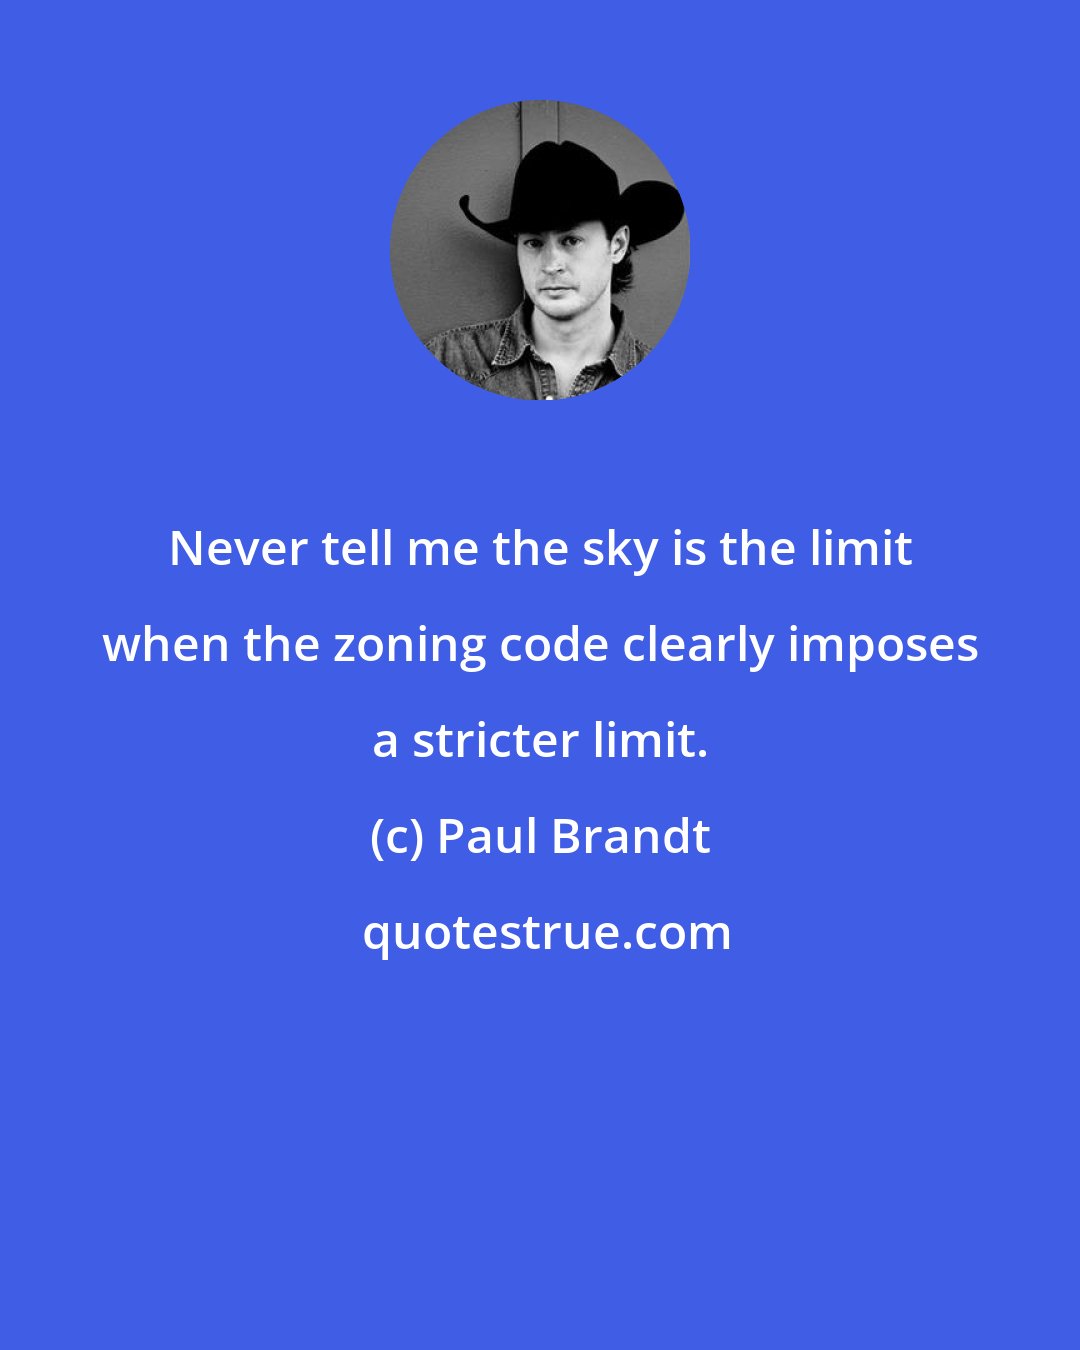 Paul Brandt: Never tell me the sky is the limit when the zoning code clearly imposes a stricter limit.